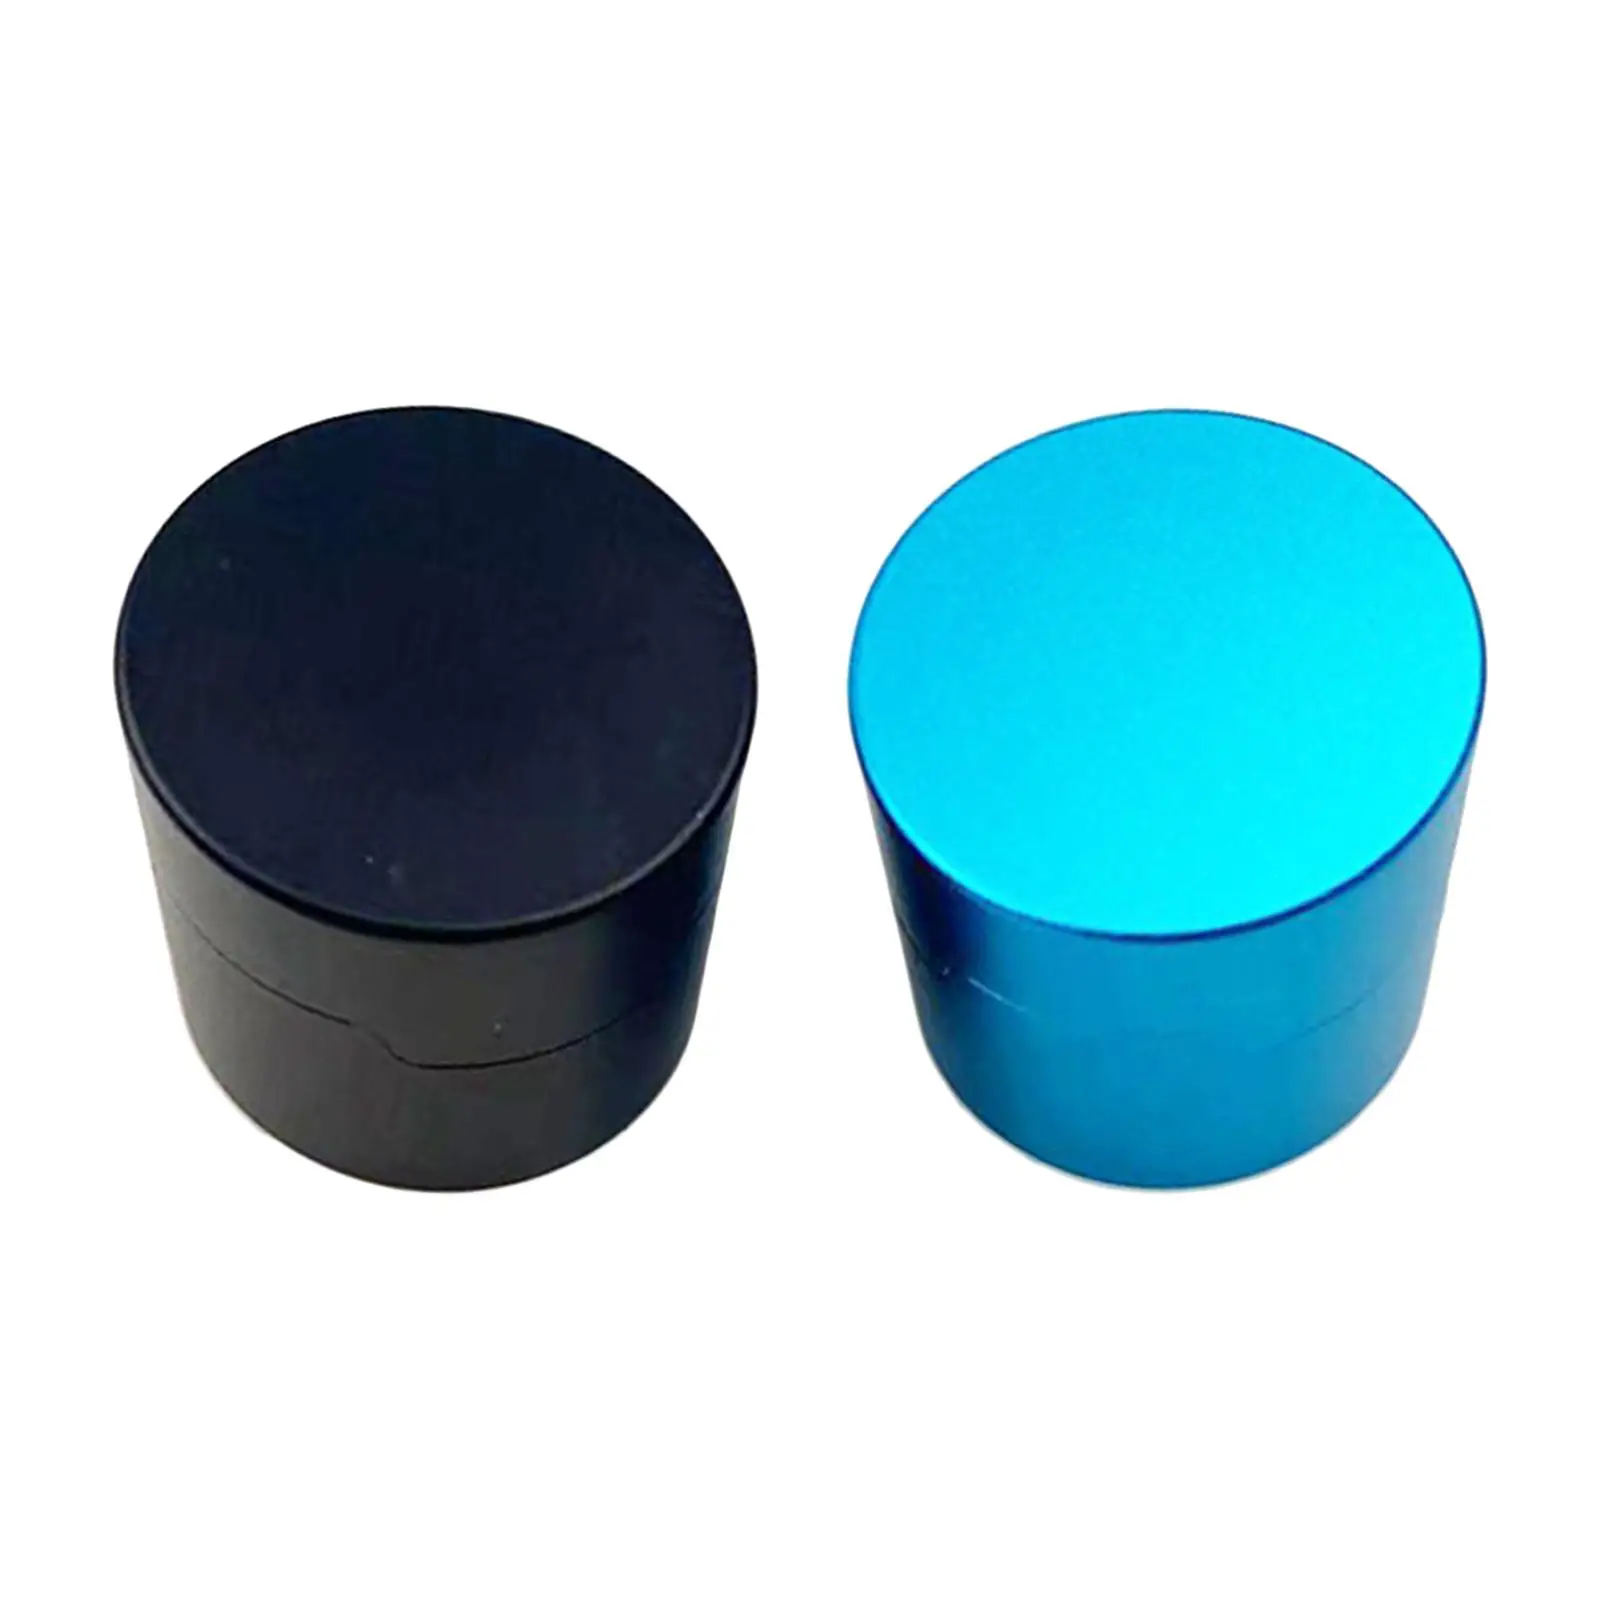 Portable Pool Cue Chalk Holder Metal Easy to Use Cup Round Shaped Organizer Chalk Holder Pool Table Accessories Entertainment